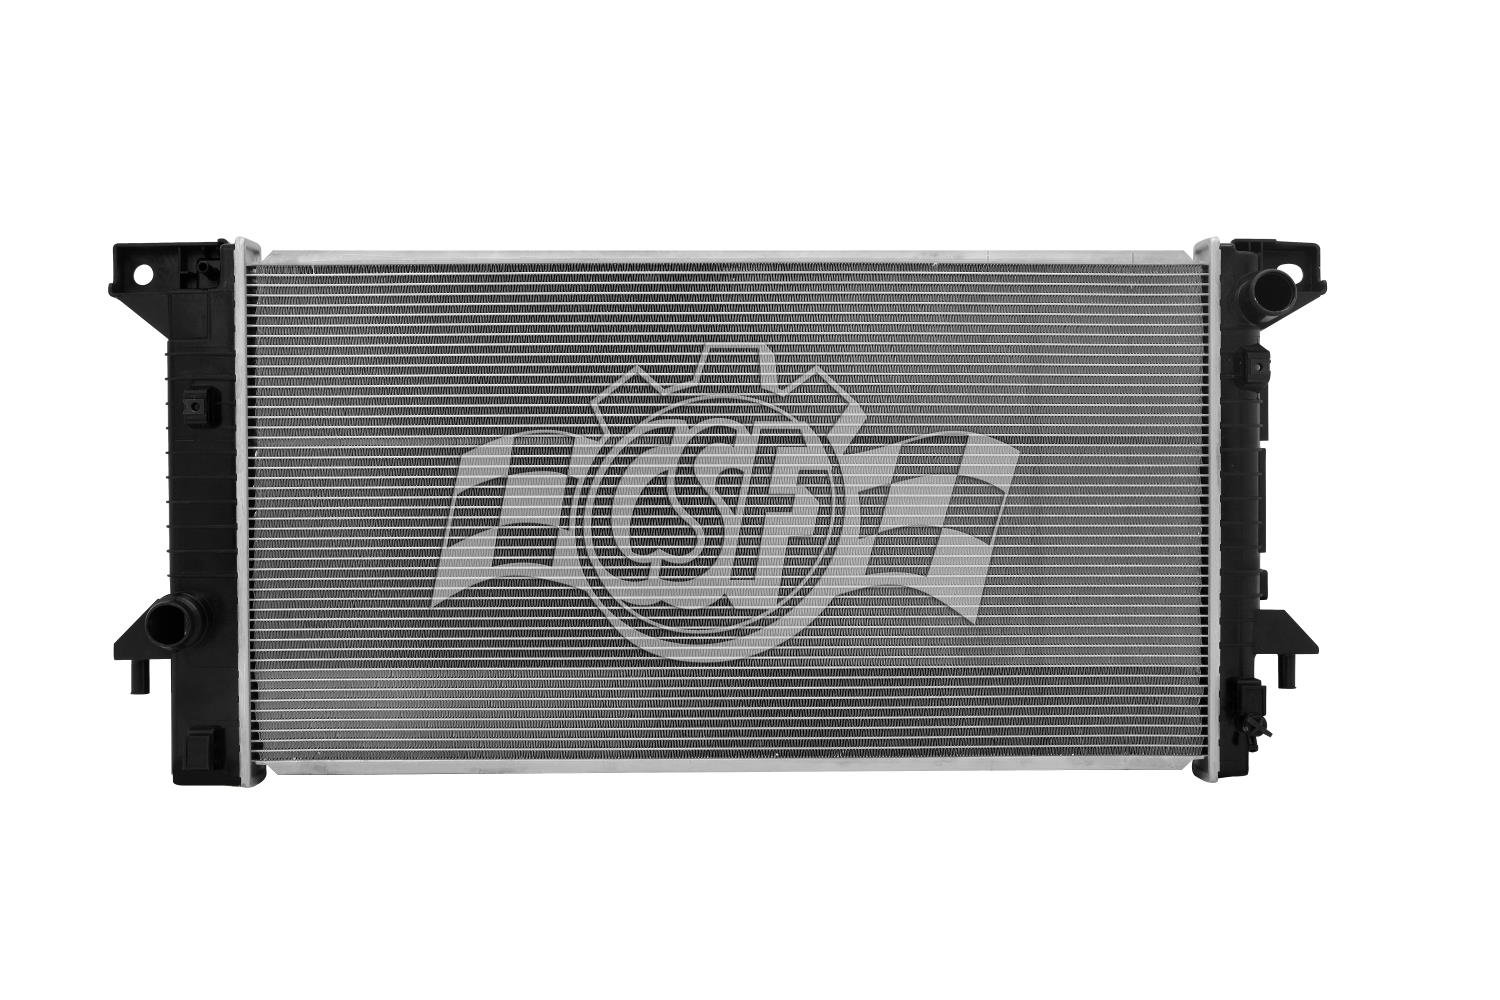 OE-Style 1-Row Radiator, Lincoln Navigator, Ford Expedition, Ford F-150